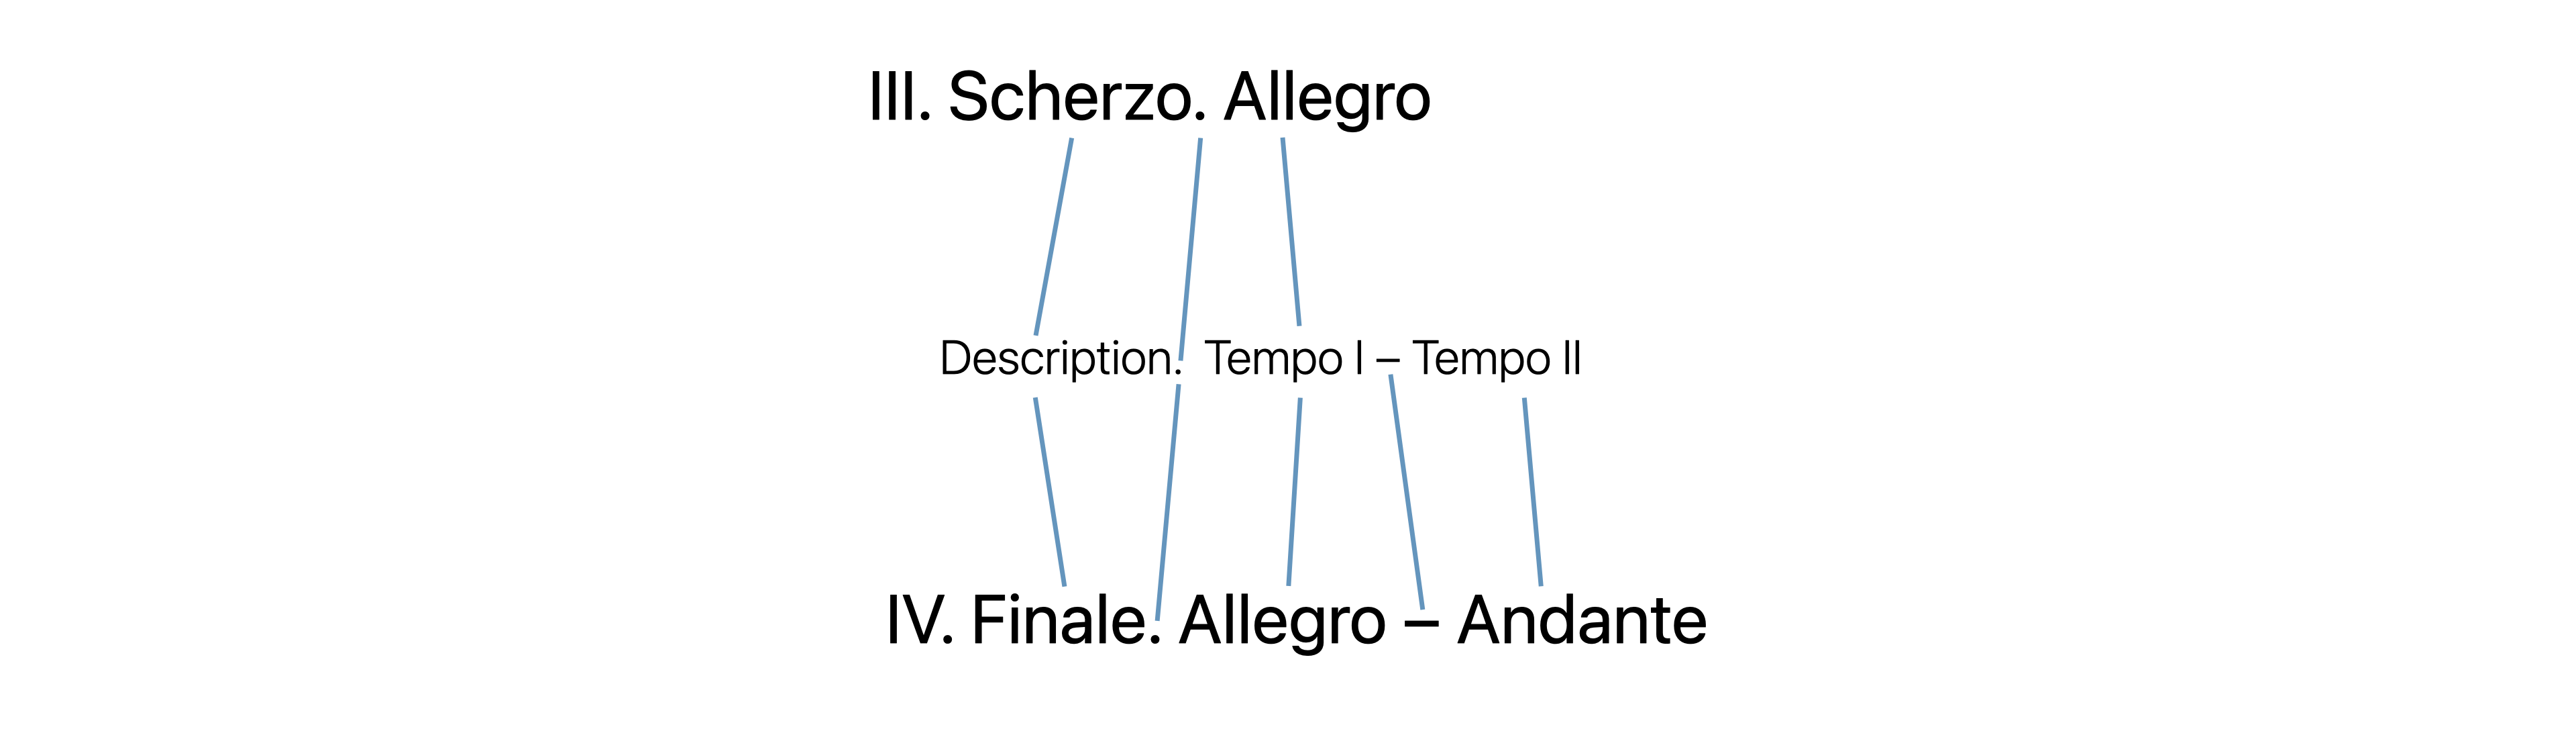 Example of how to format extended movement titles of classical works.